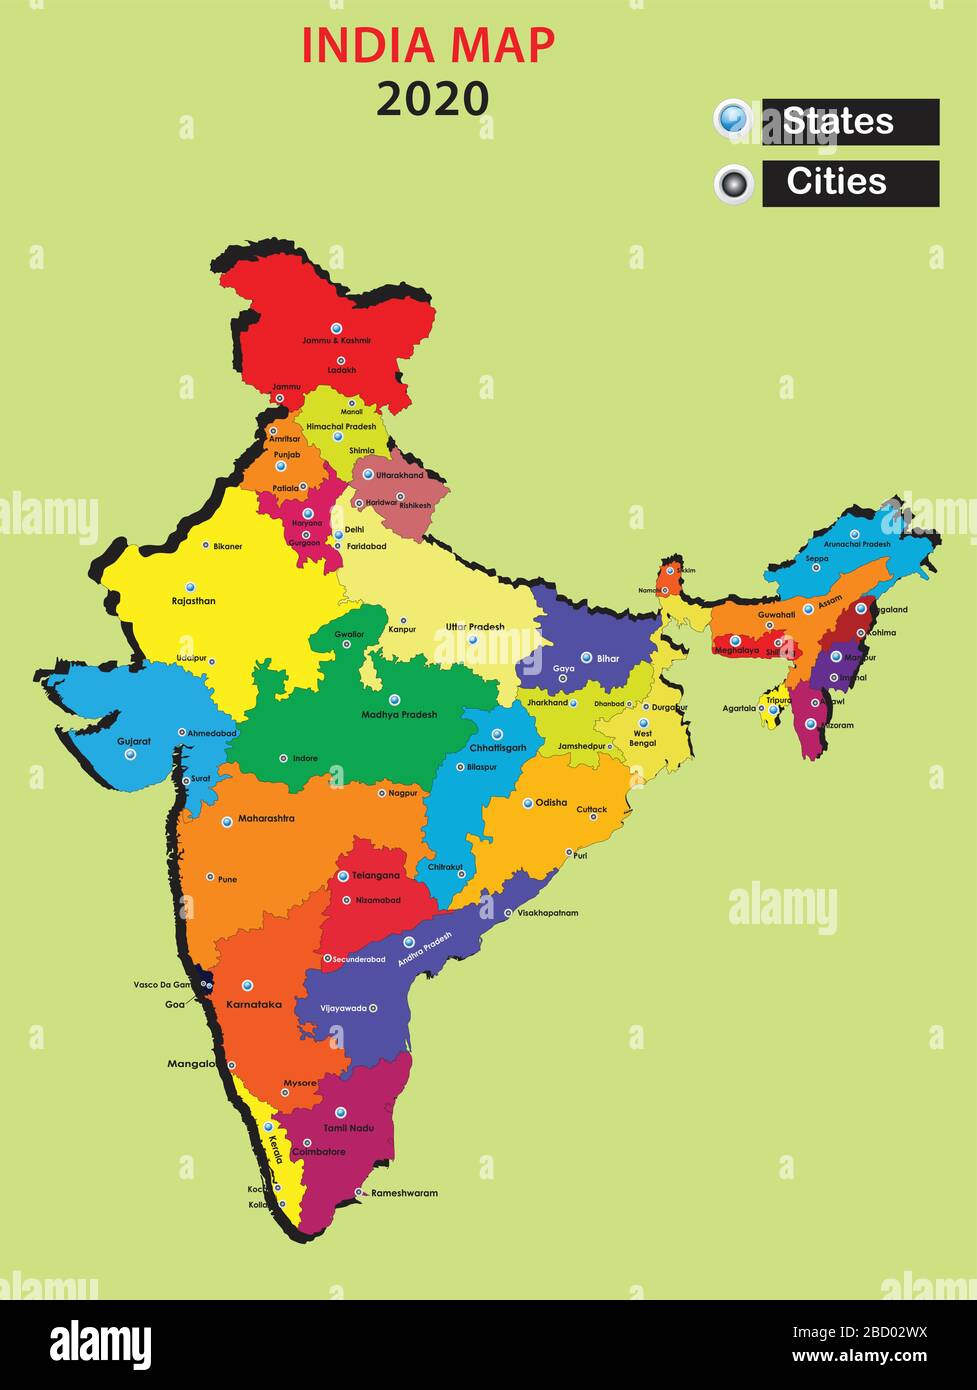 State and cities of India.India new map in 2020.3d view of India map. Stock Vector